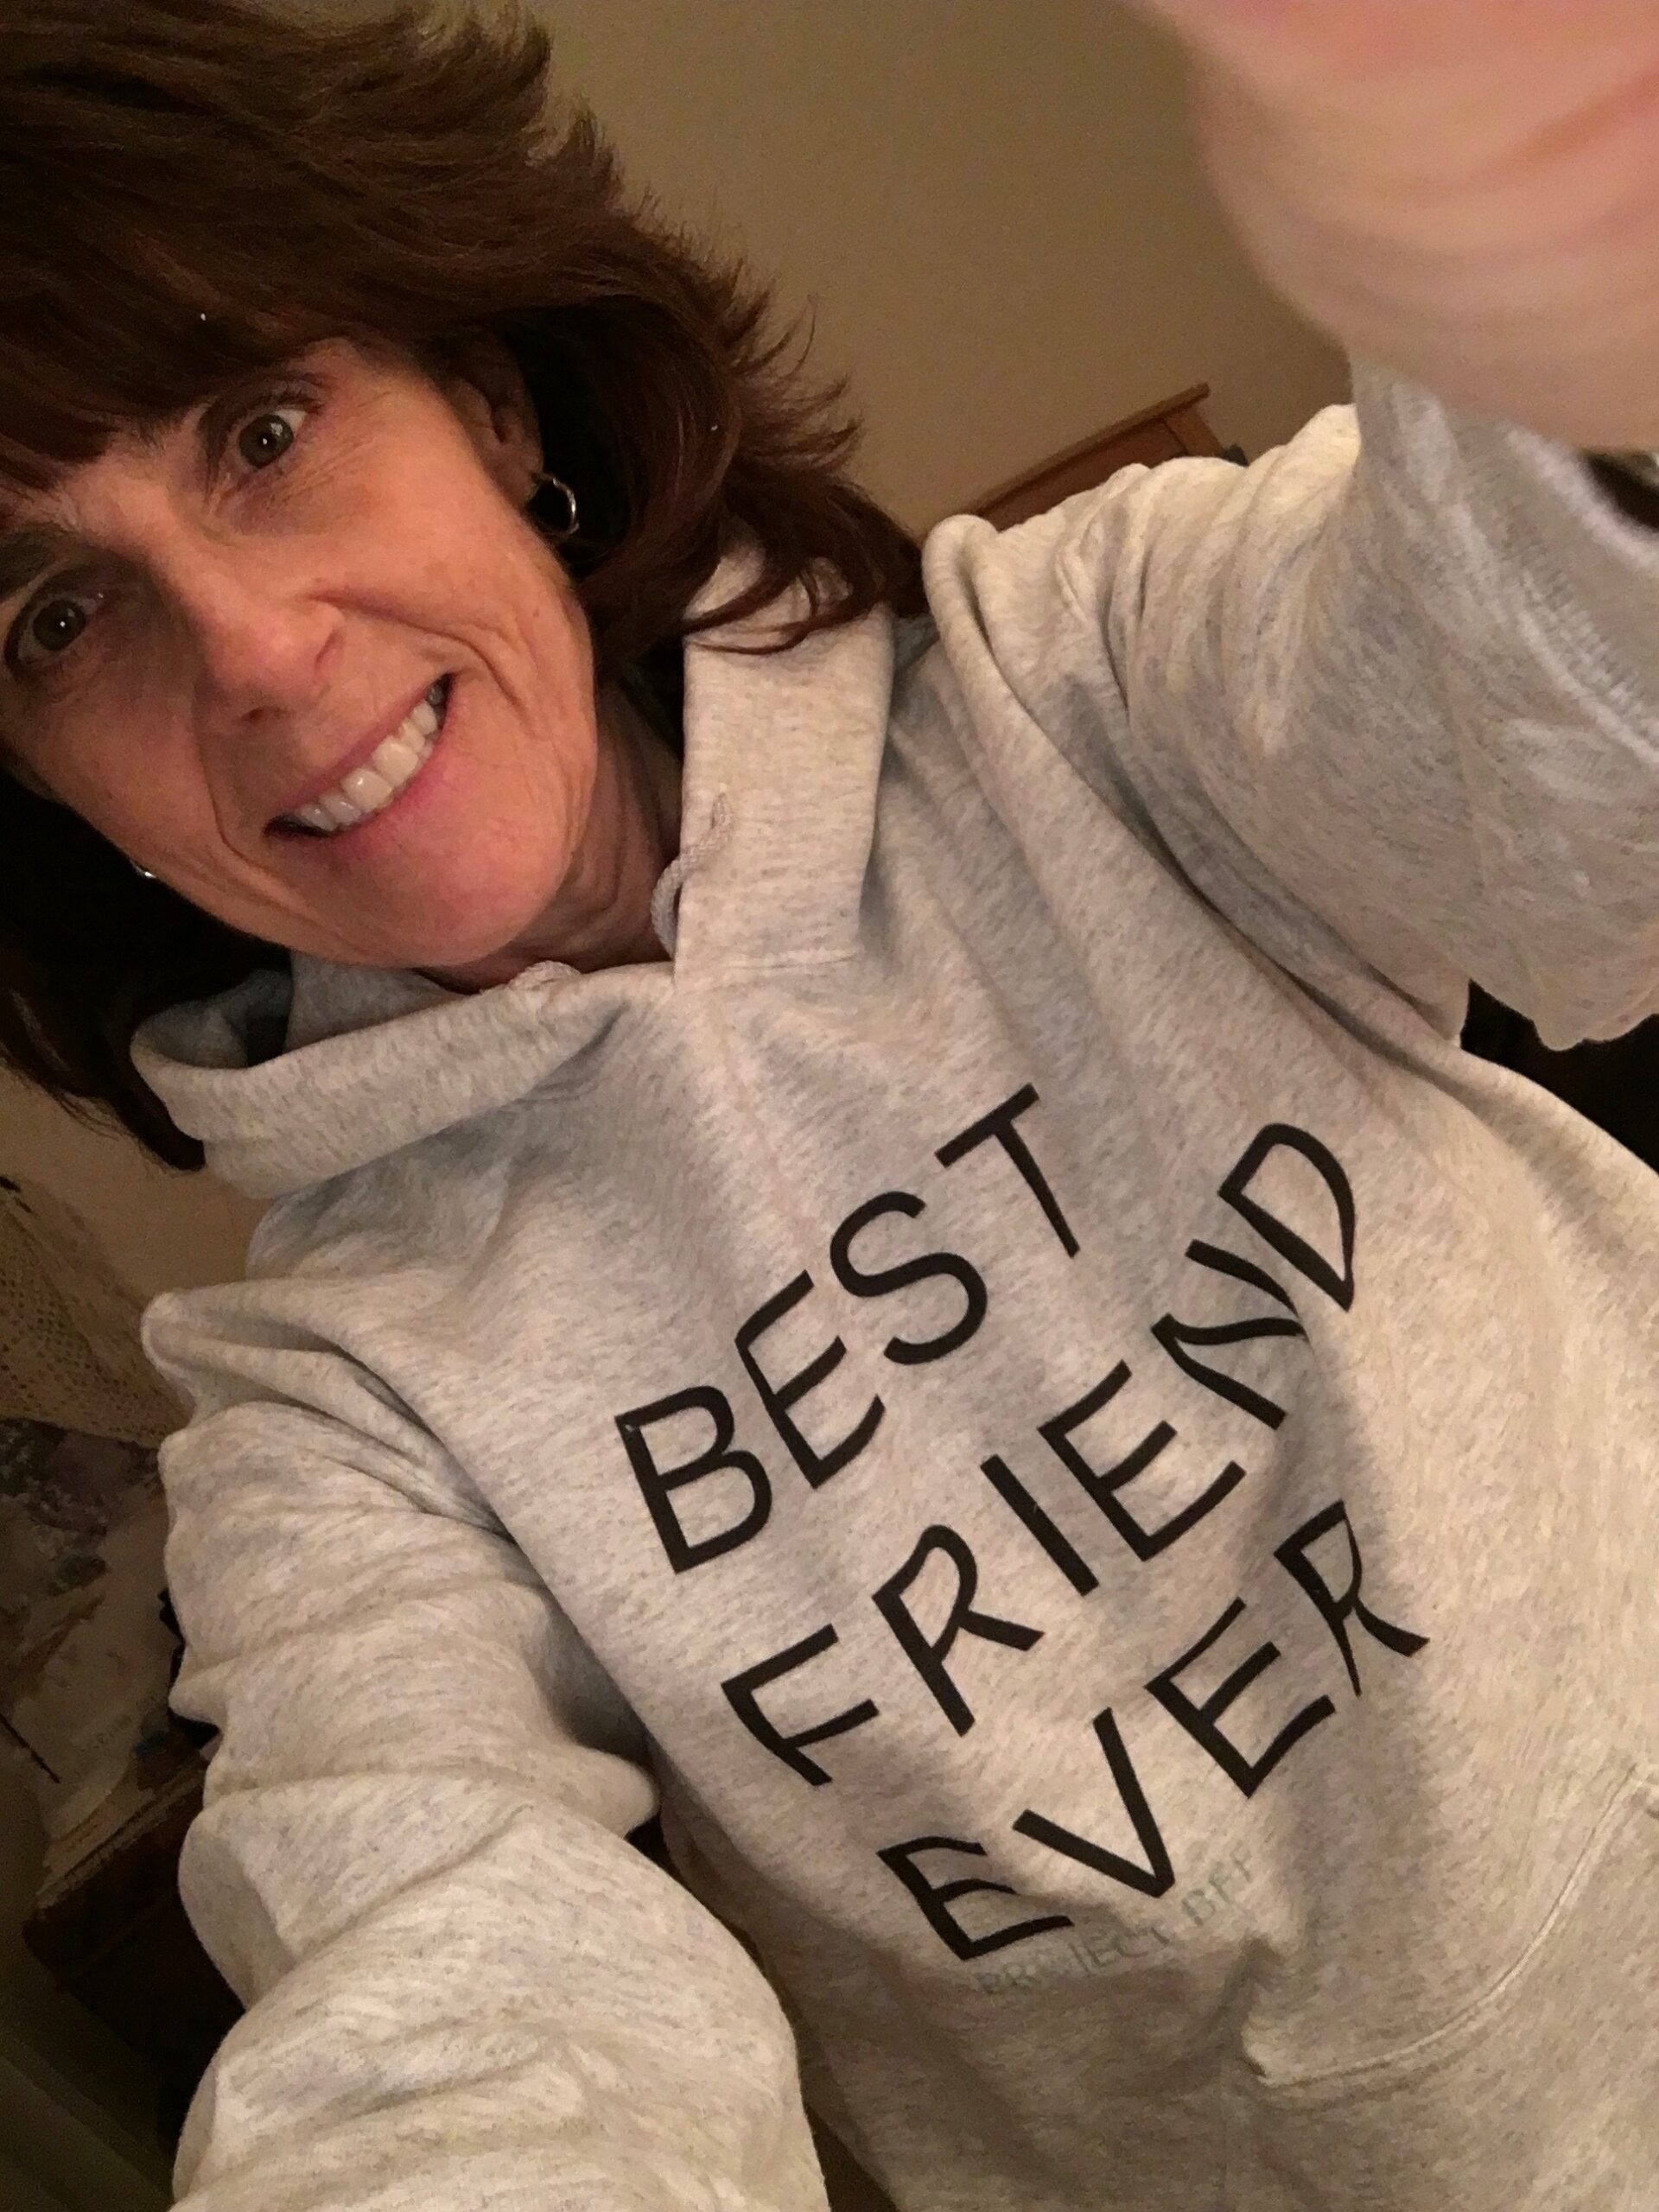 Photo of Terri, smiling brown-haired woman wearing a gray hooded sweatshirt with the words "Best friend forever."